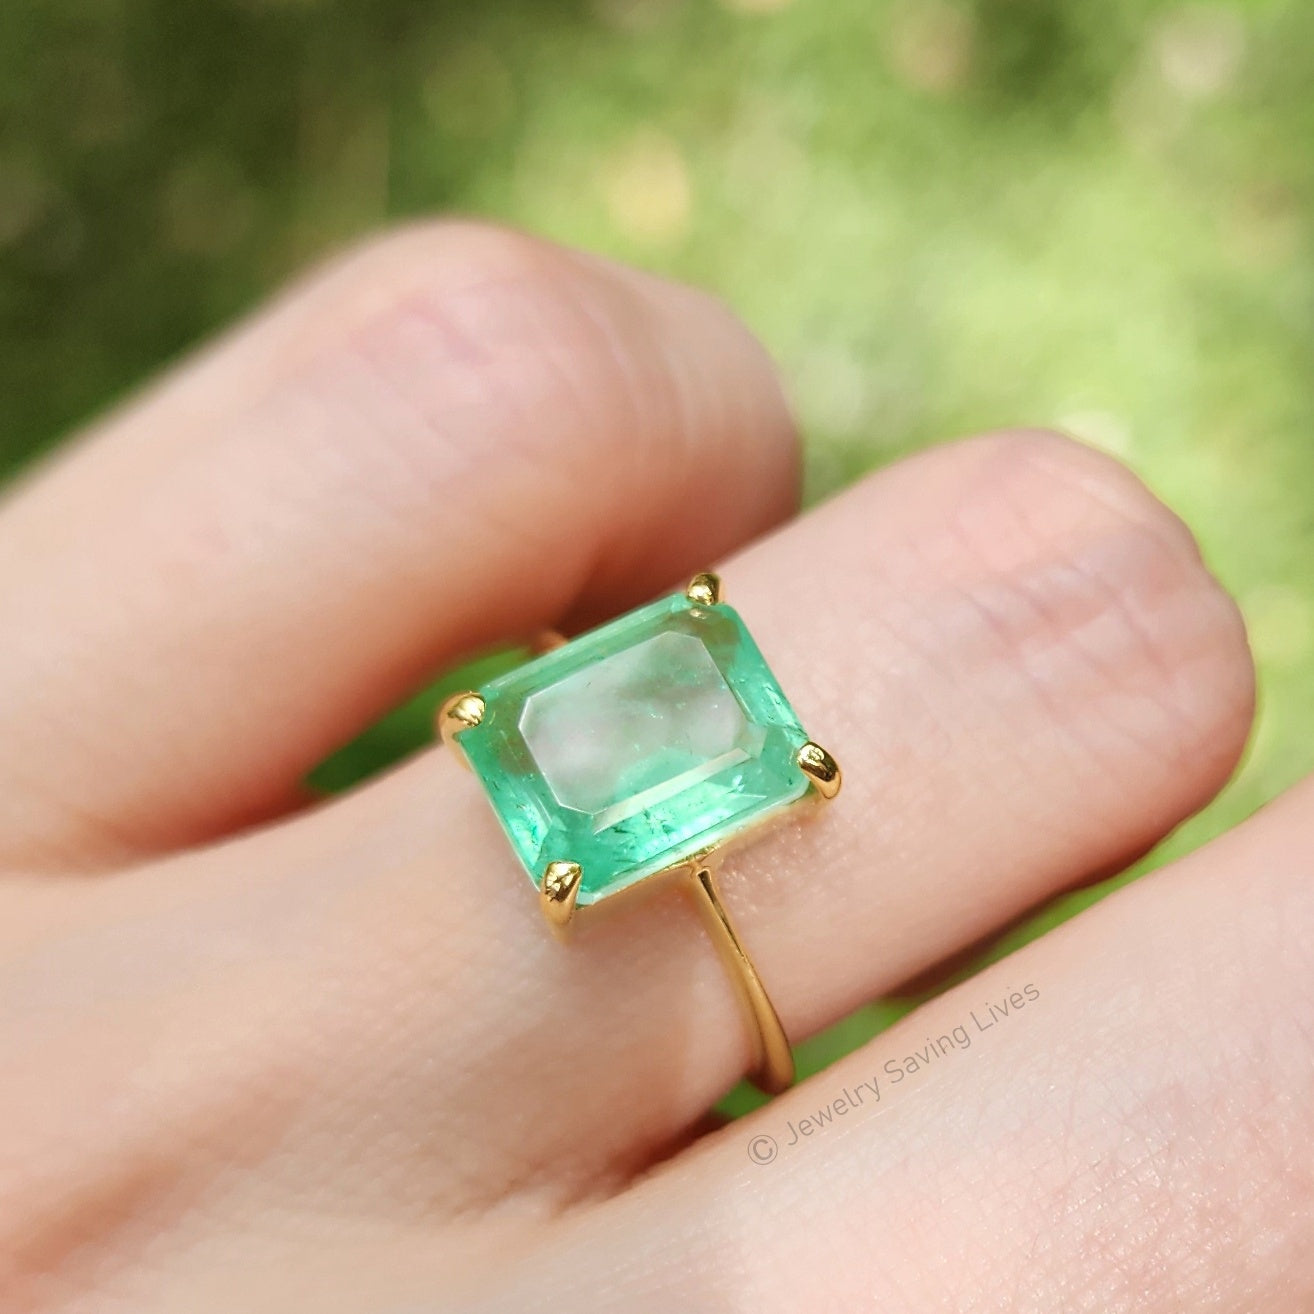 The Audrey- Raw Doublet Emerald